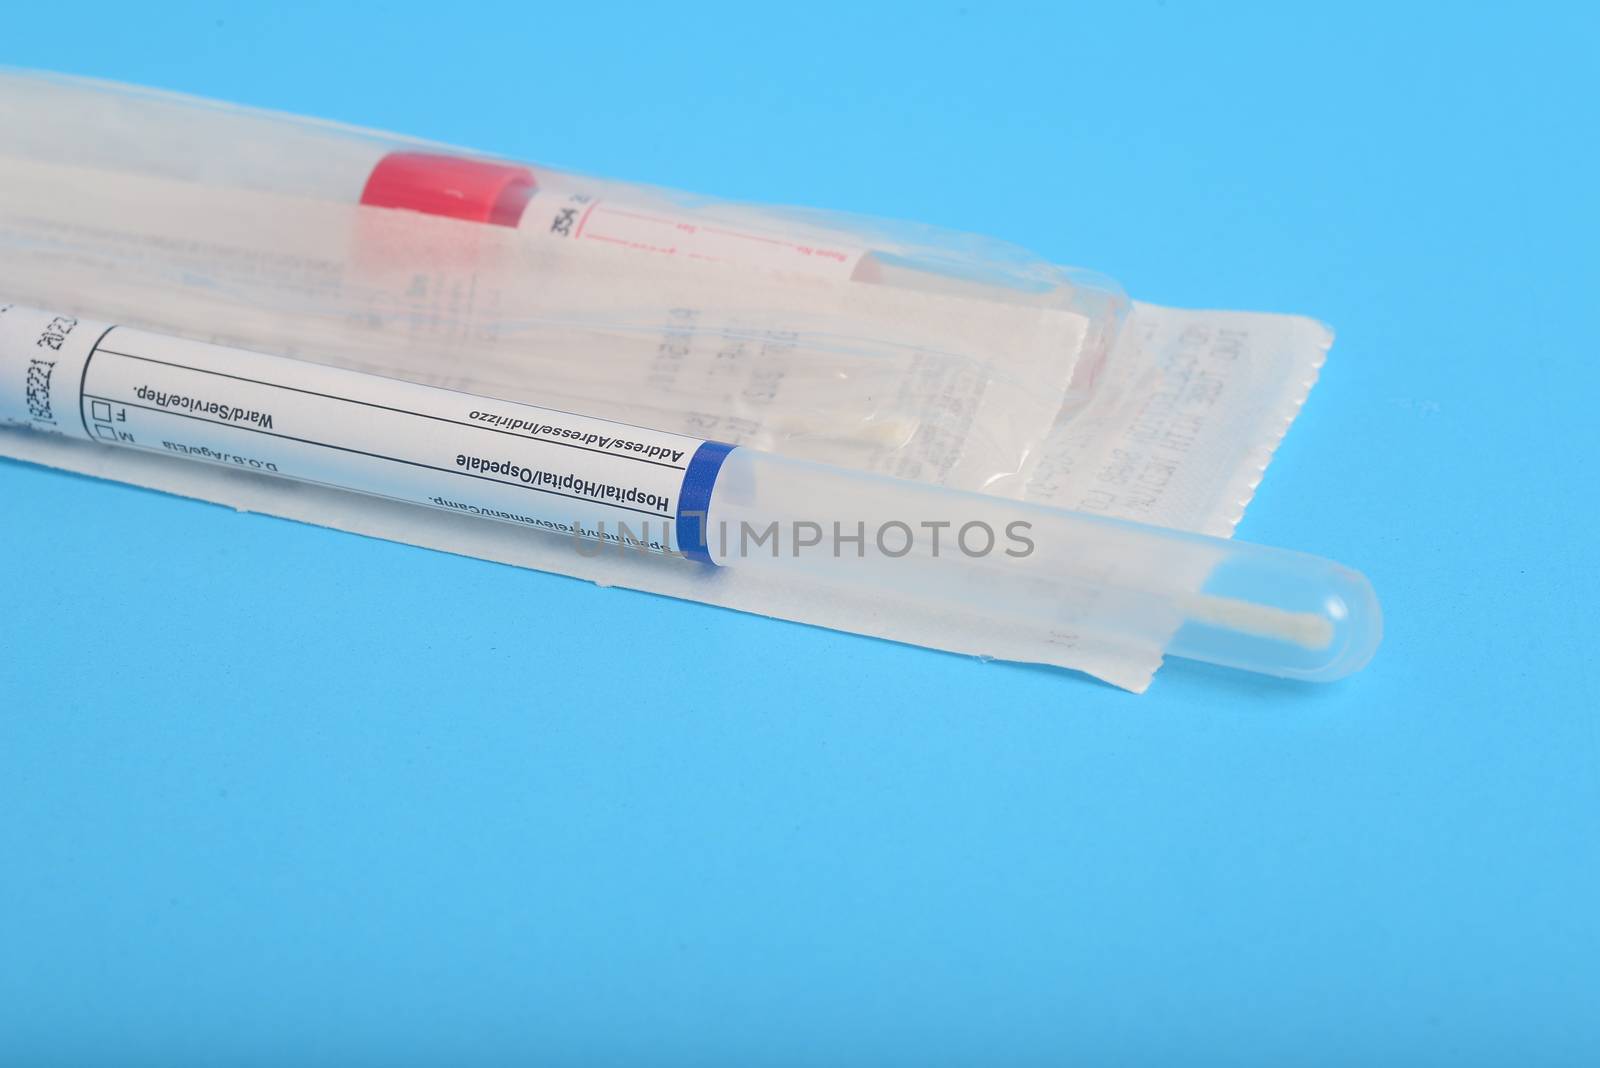 Universal Transport Medium for Viruses, Chlamydia, Mycoplasma and Ureaplasma and swab for nasopharyngeal sample collection, For respiratory virus detection for covid-19 by ideation90